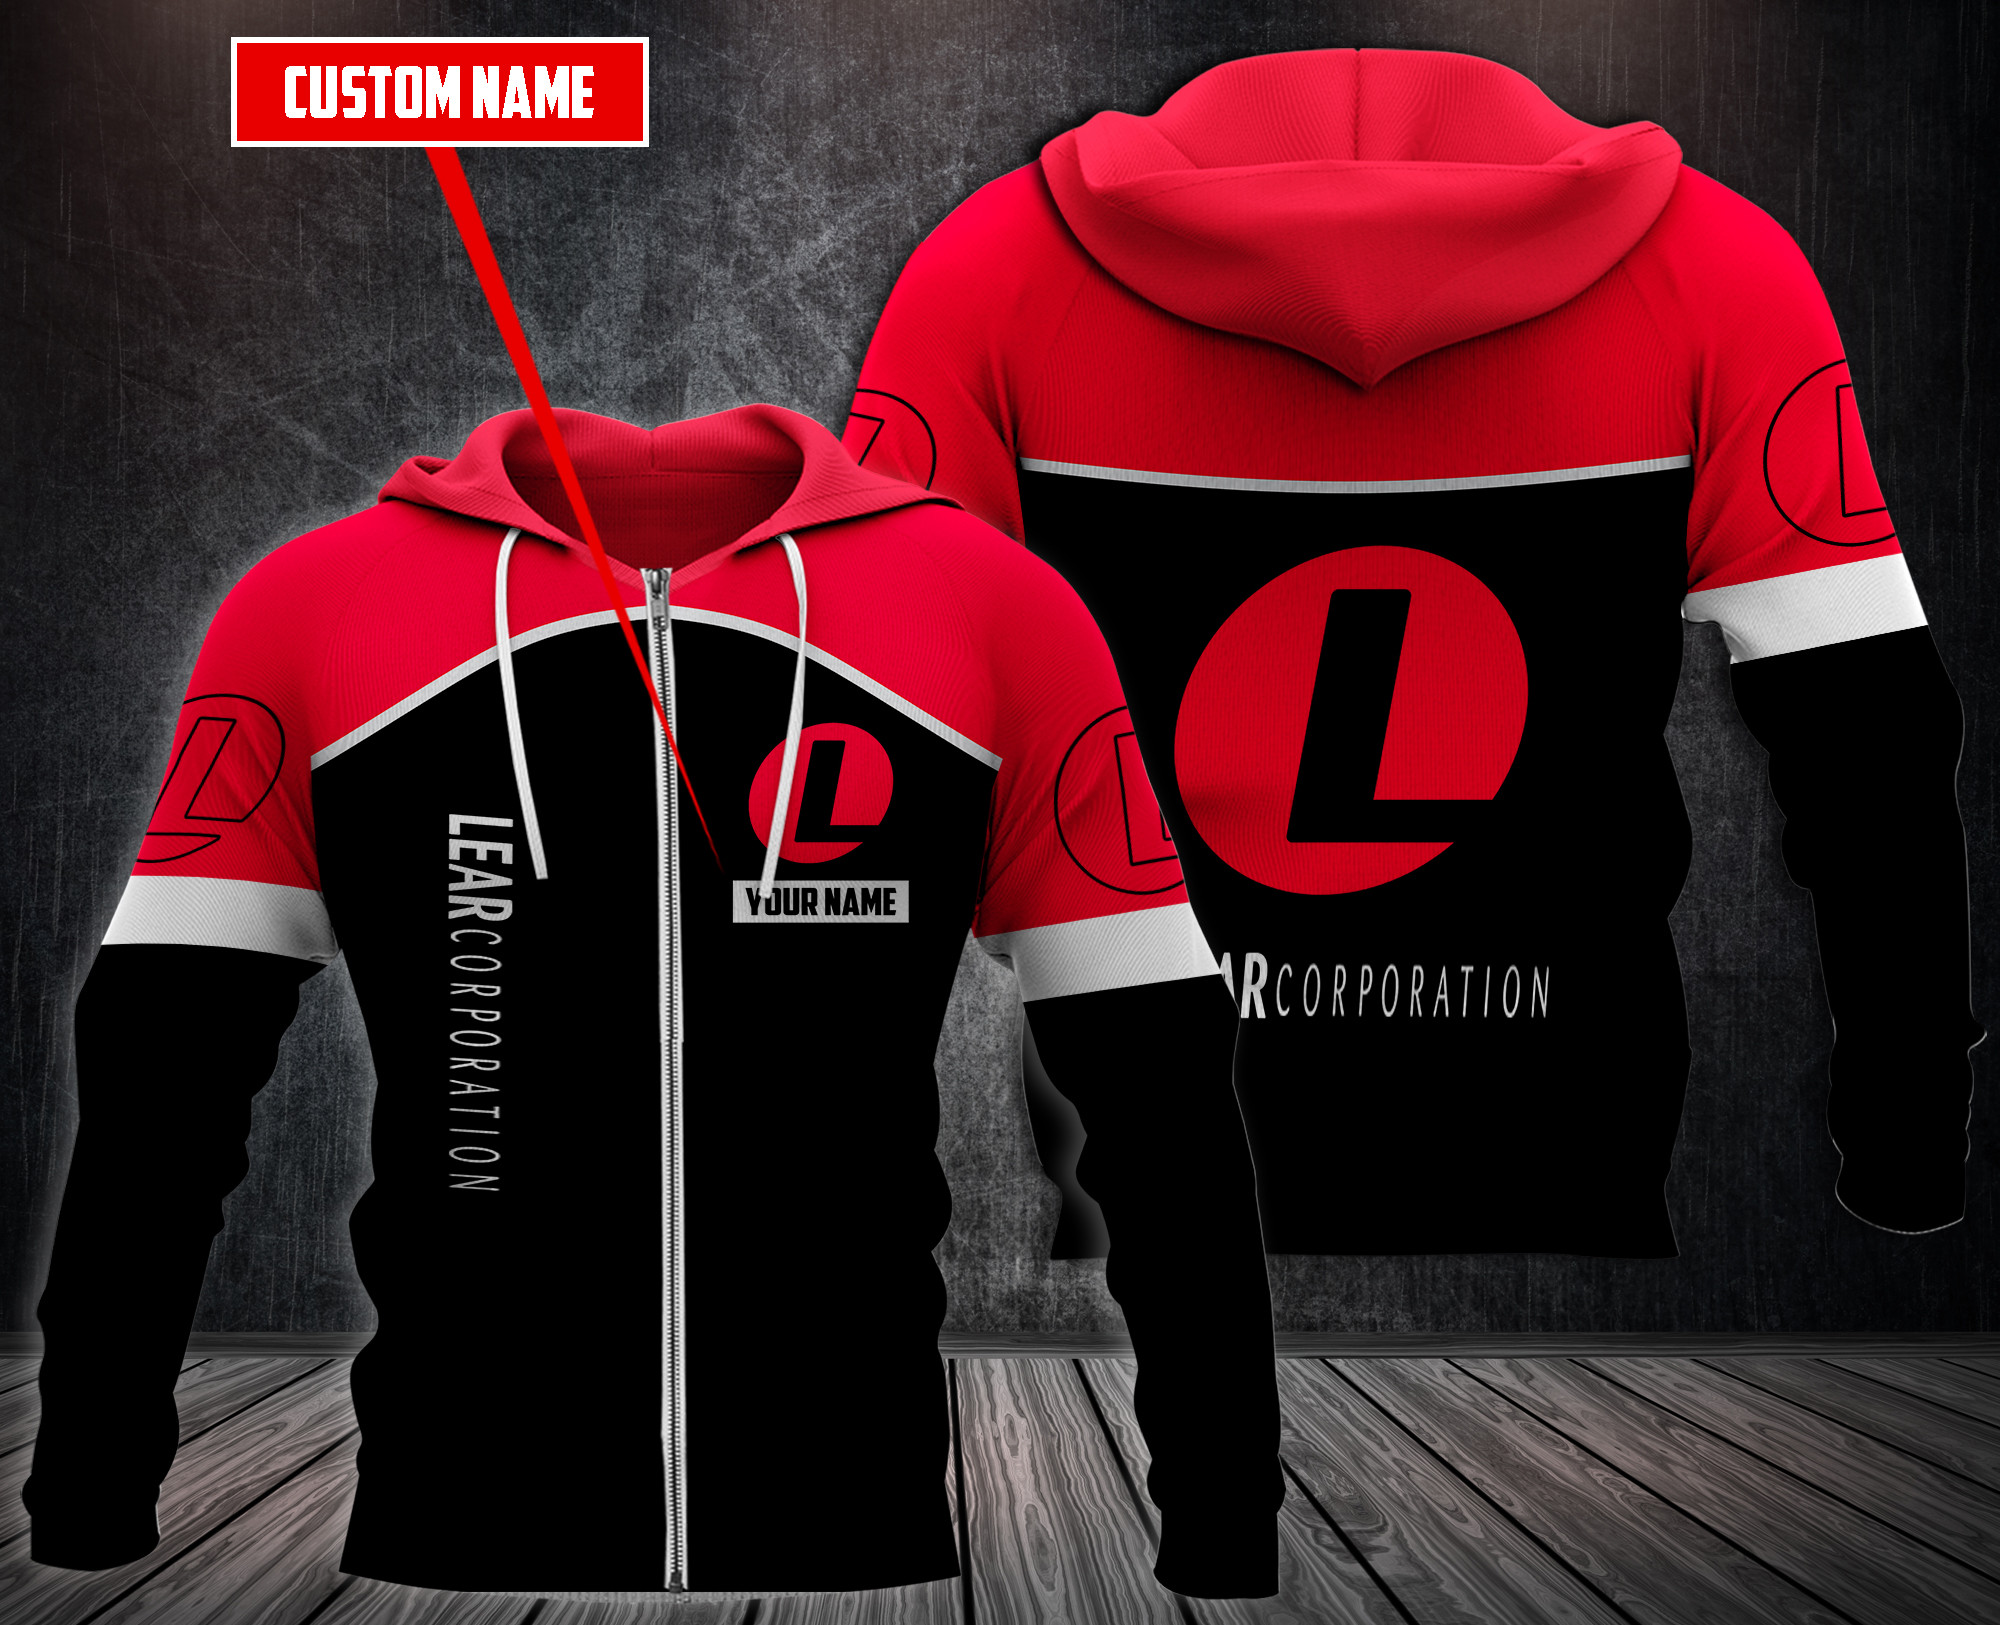 Choose the right hoodies for you on our boxboxshirt and ethershirt websites in 2022 114